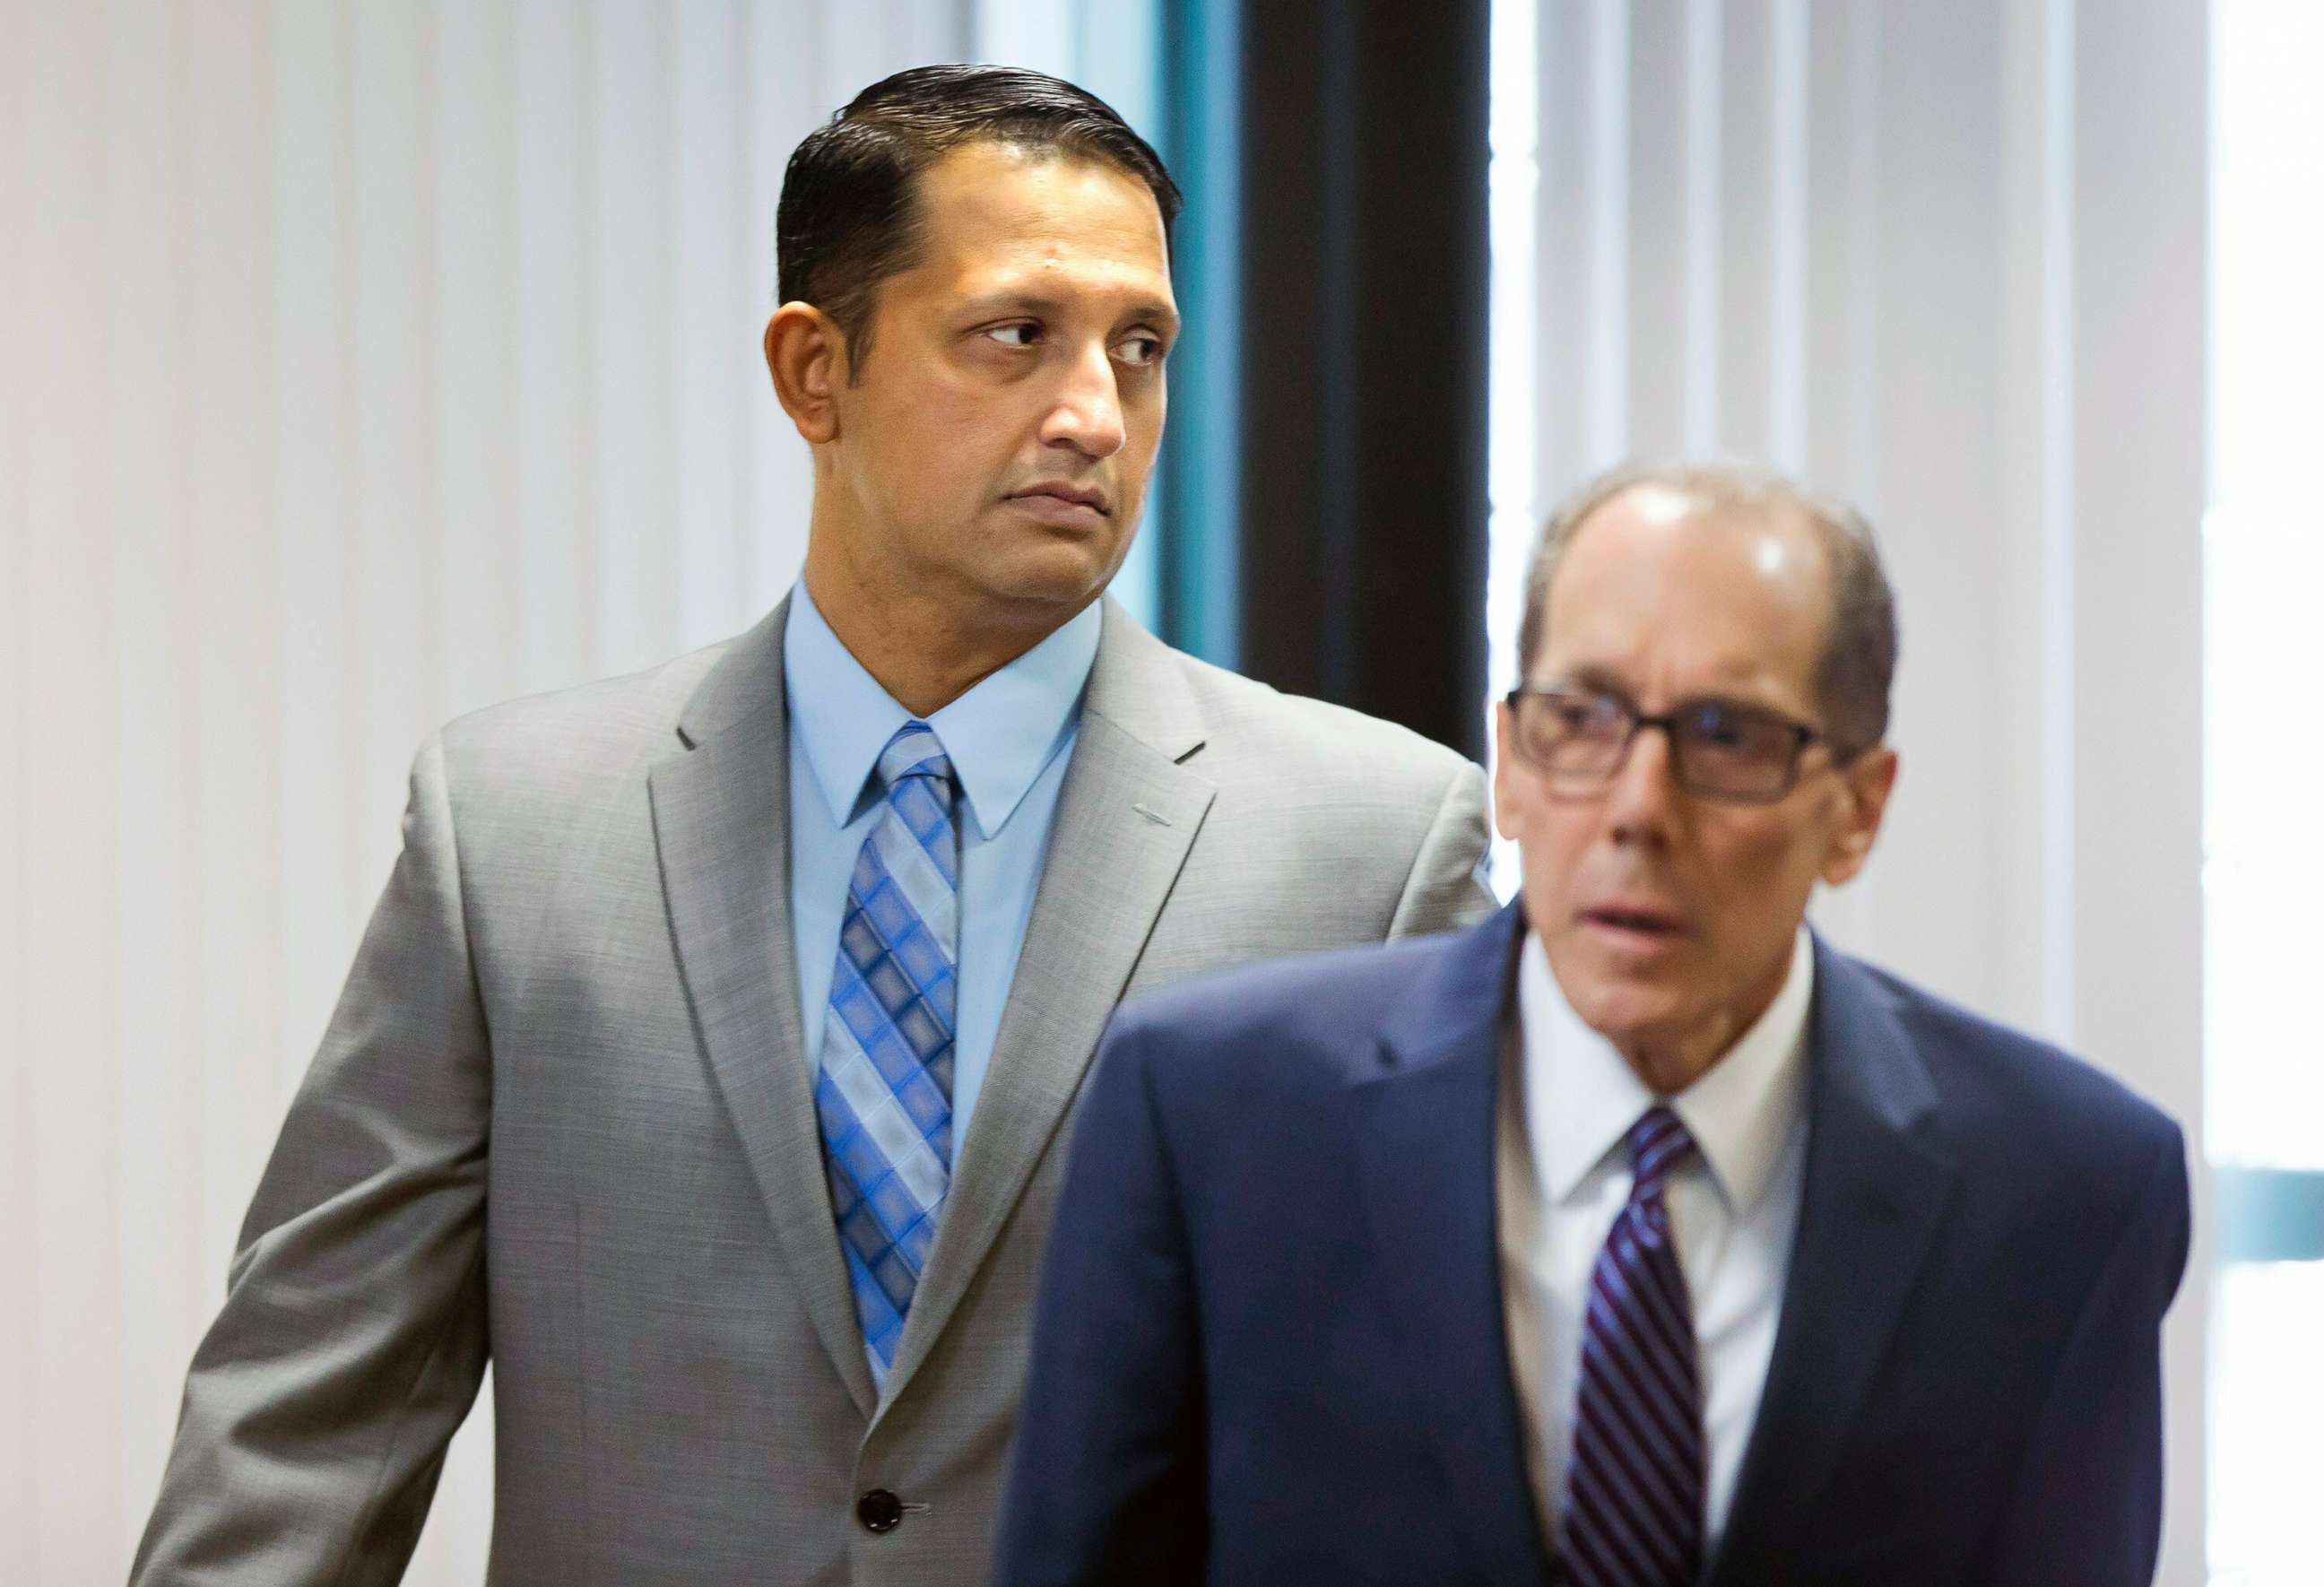 PHOTO: Nouman Raja enters the courtroom with defense attorney Richard Lubin for closing arguments in his trial, March 6, 2019, in West Palm Beach, Fla.